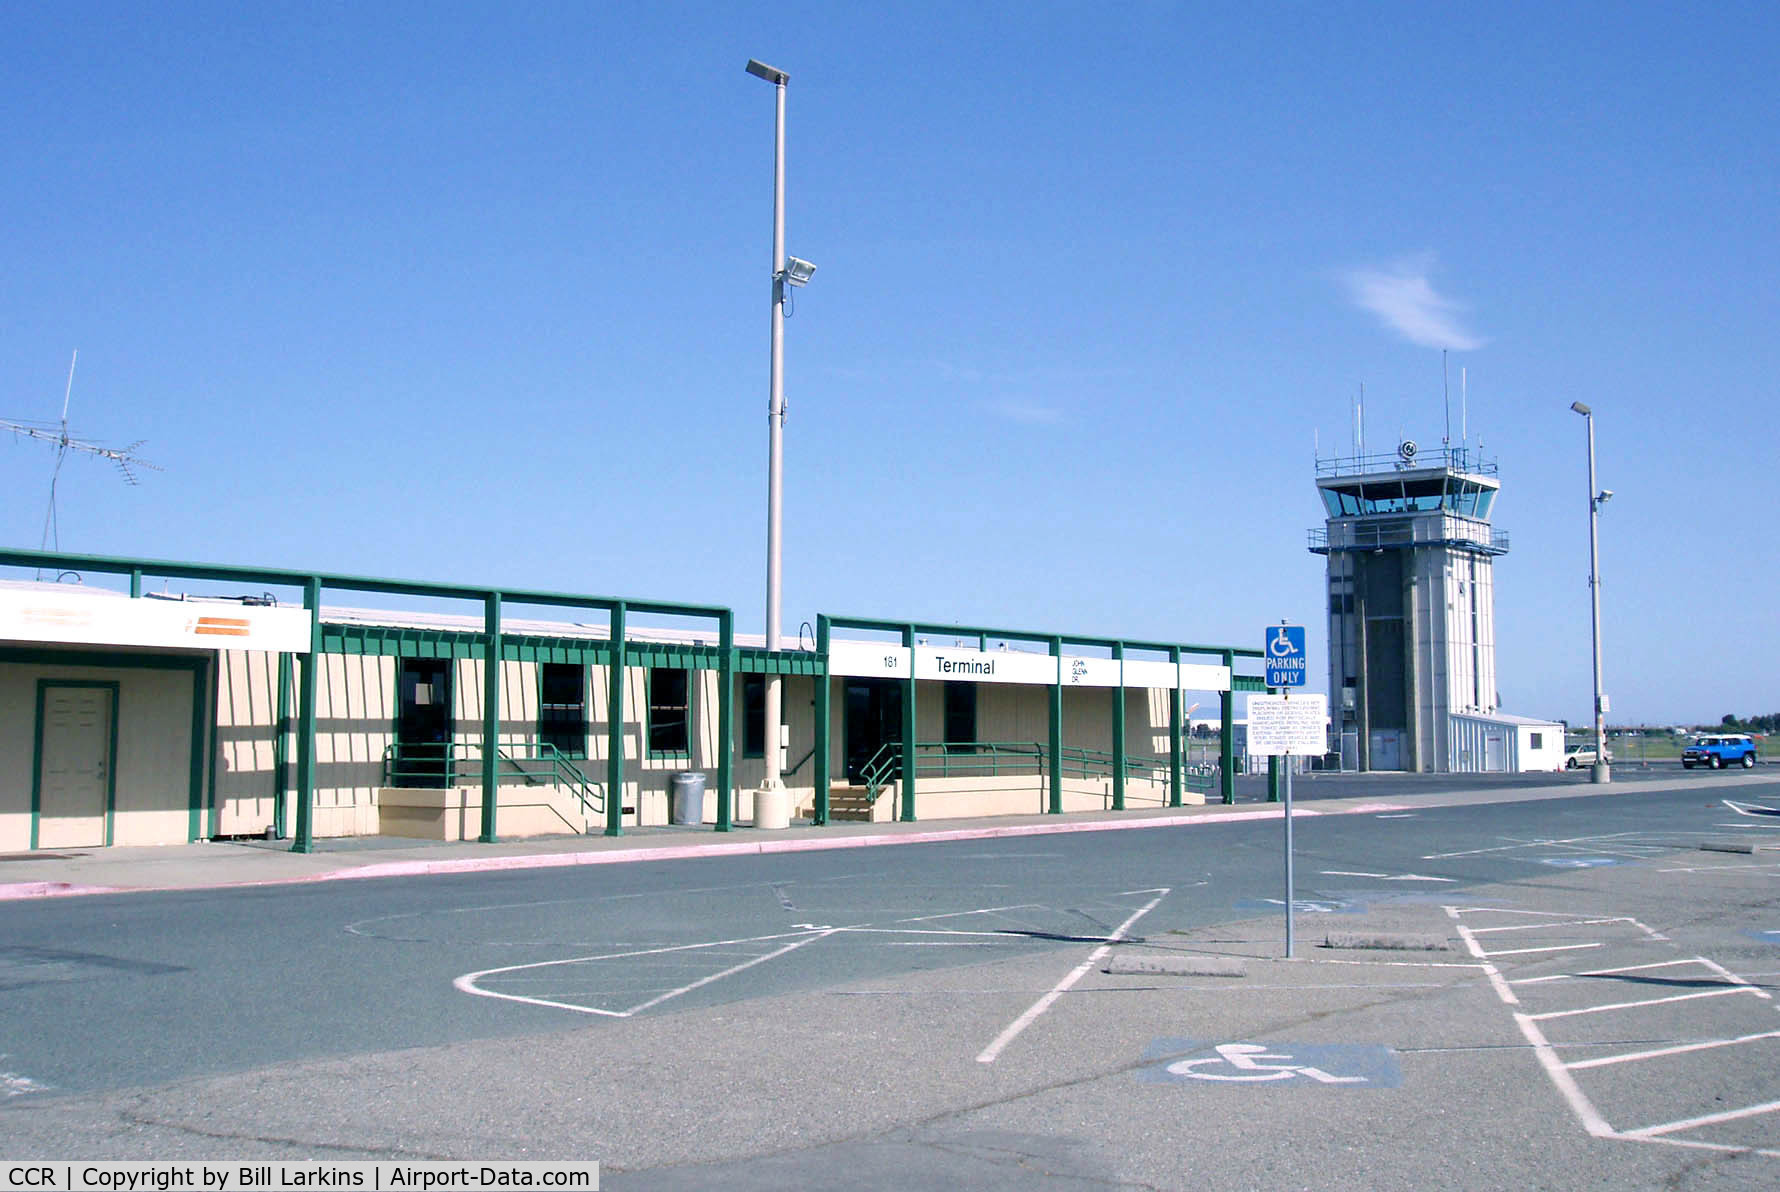 Buchanan Field Airport (CCR) - Tower and old airline Terminal, April 2008.